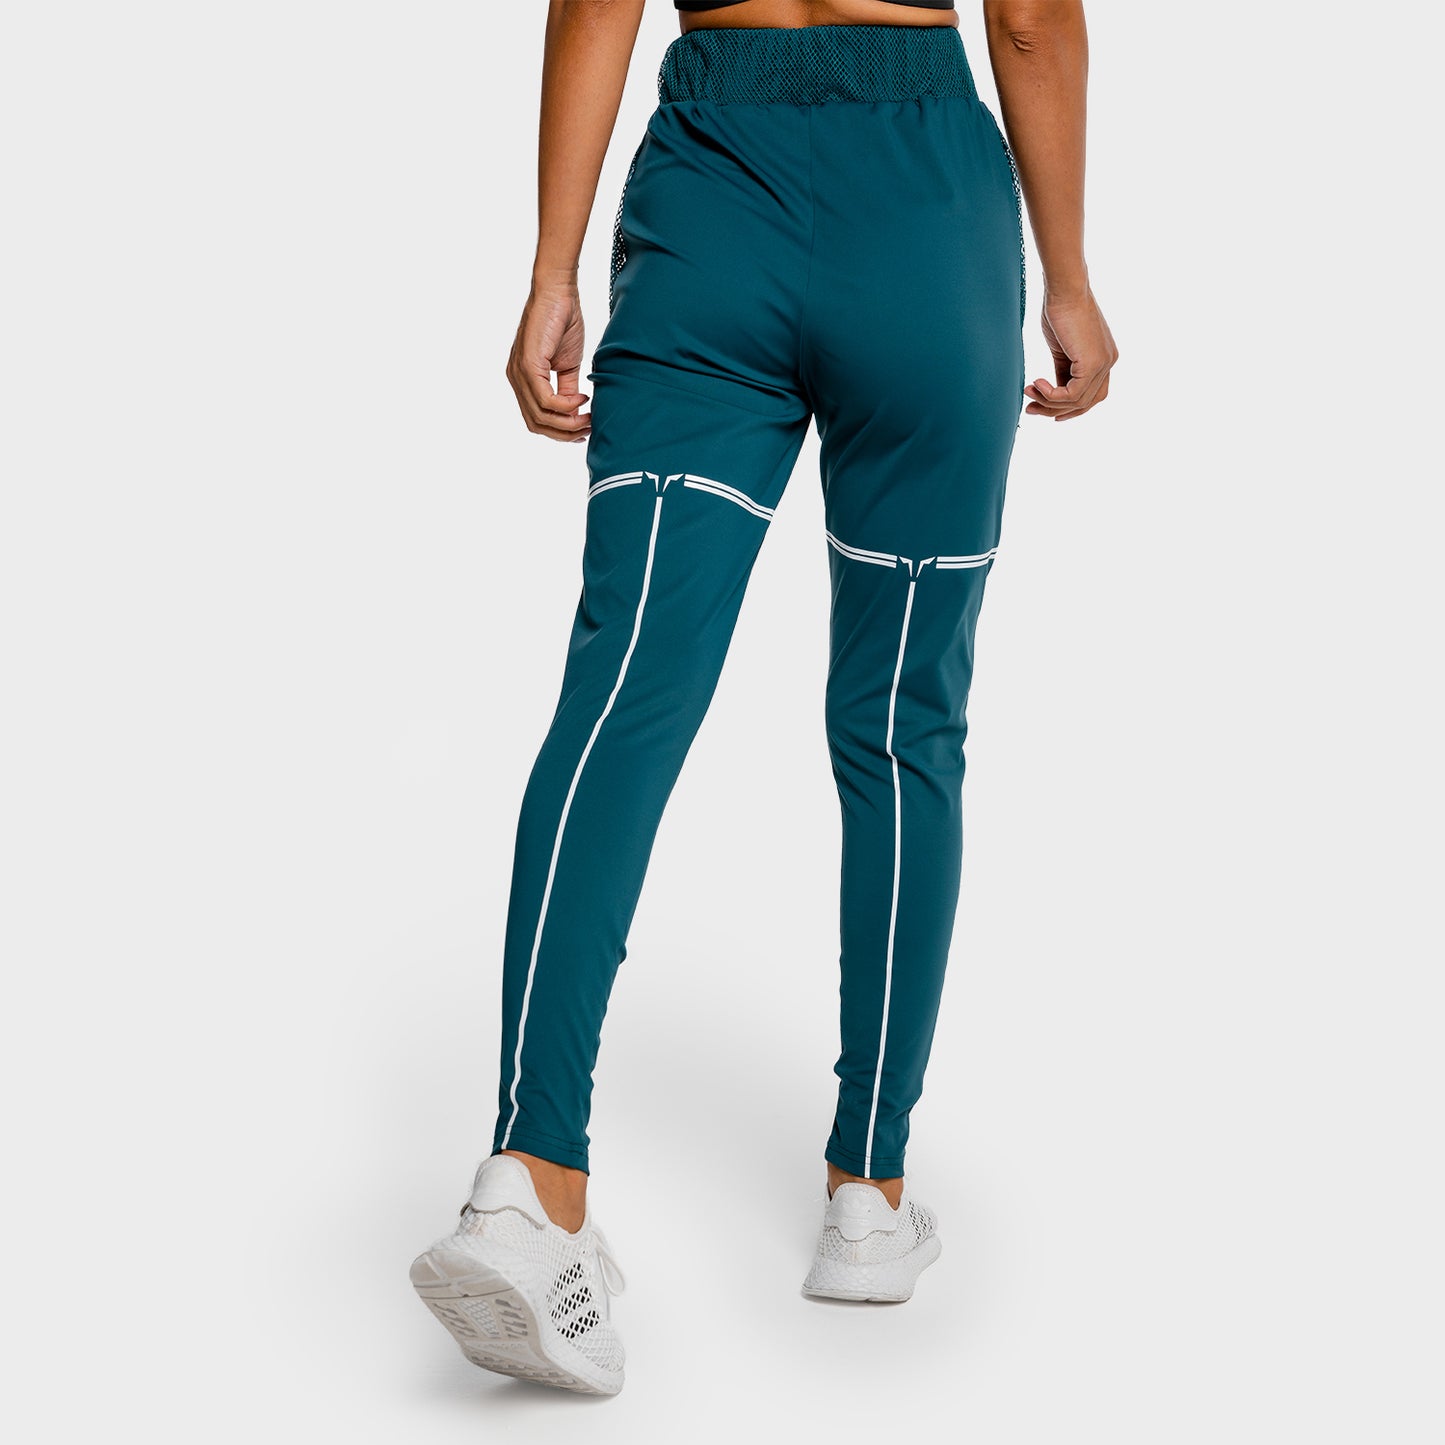 squatwolf-gym-pants-for-women-noor-track-pants-teal-workout-clothes